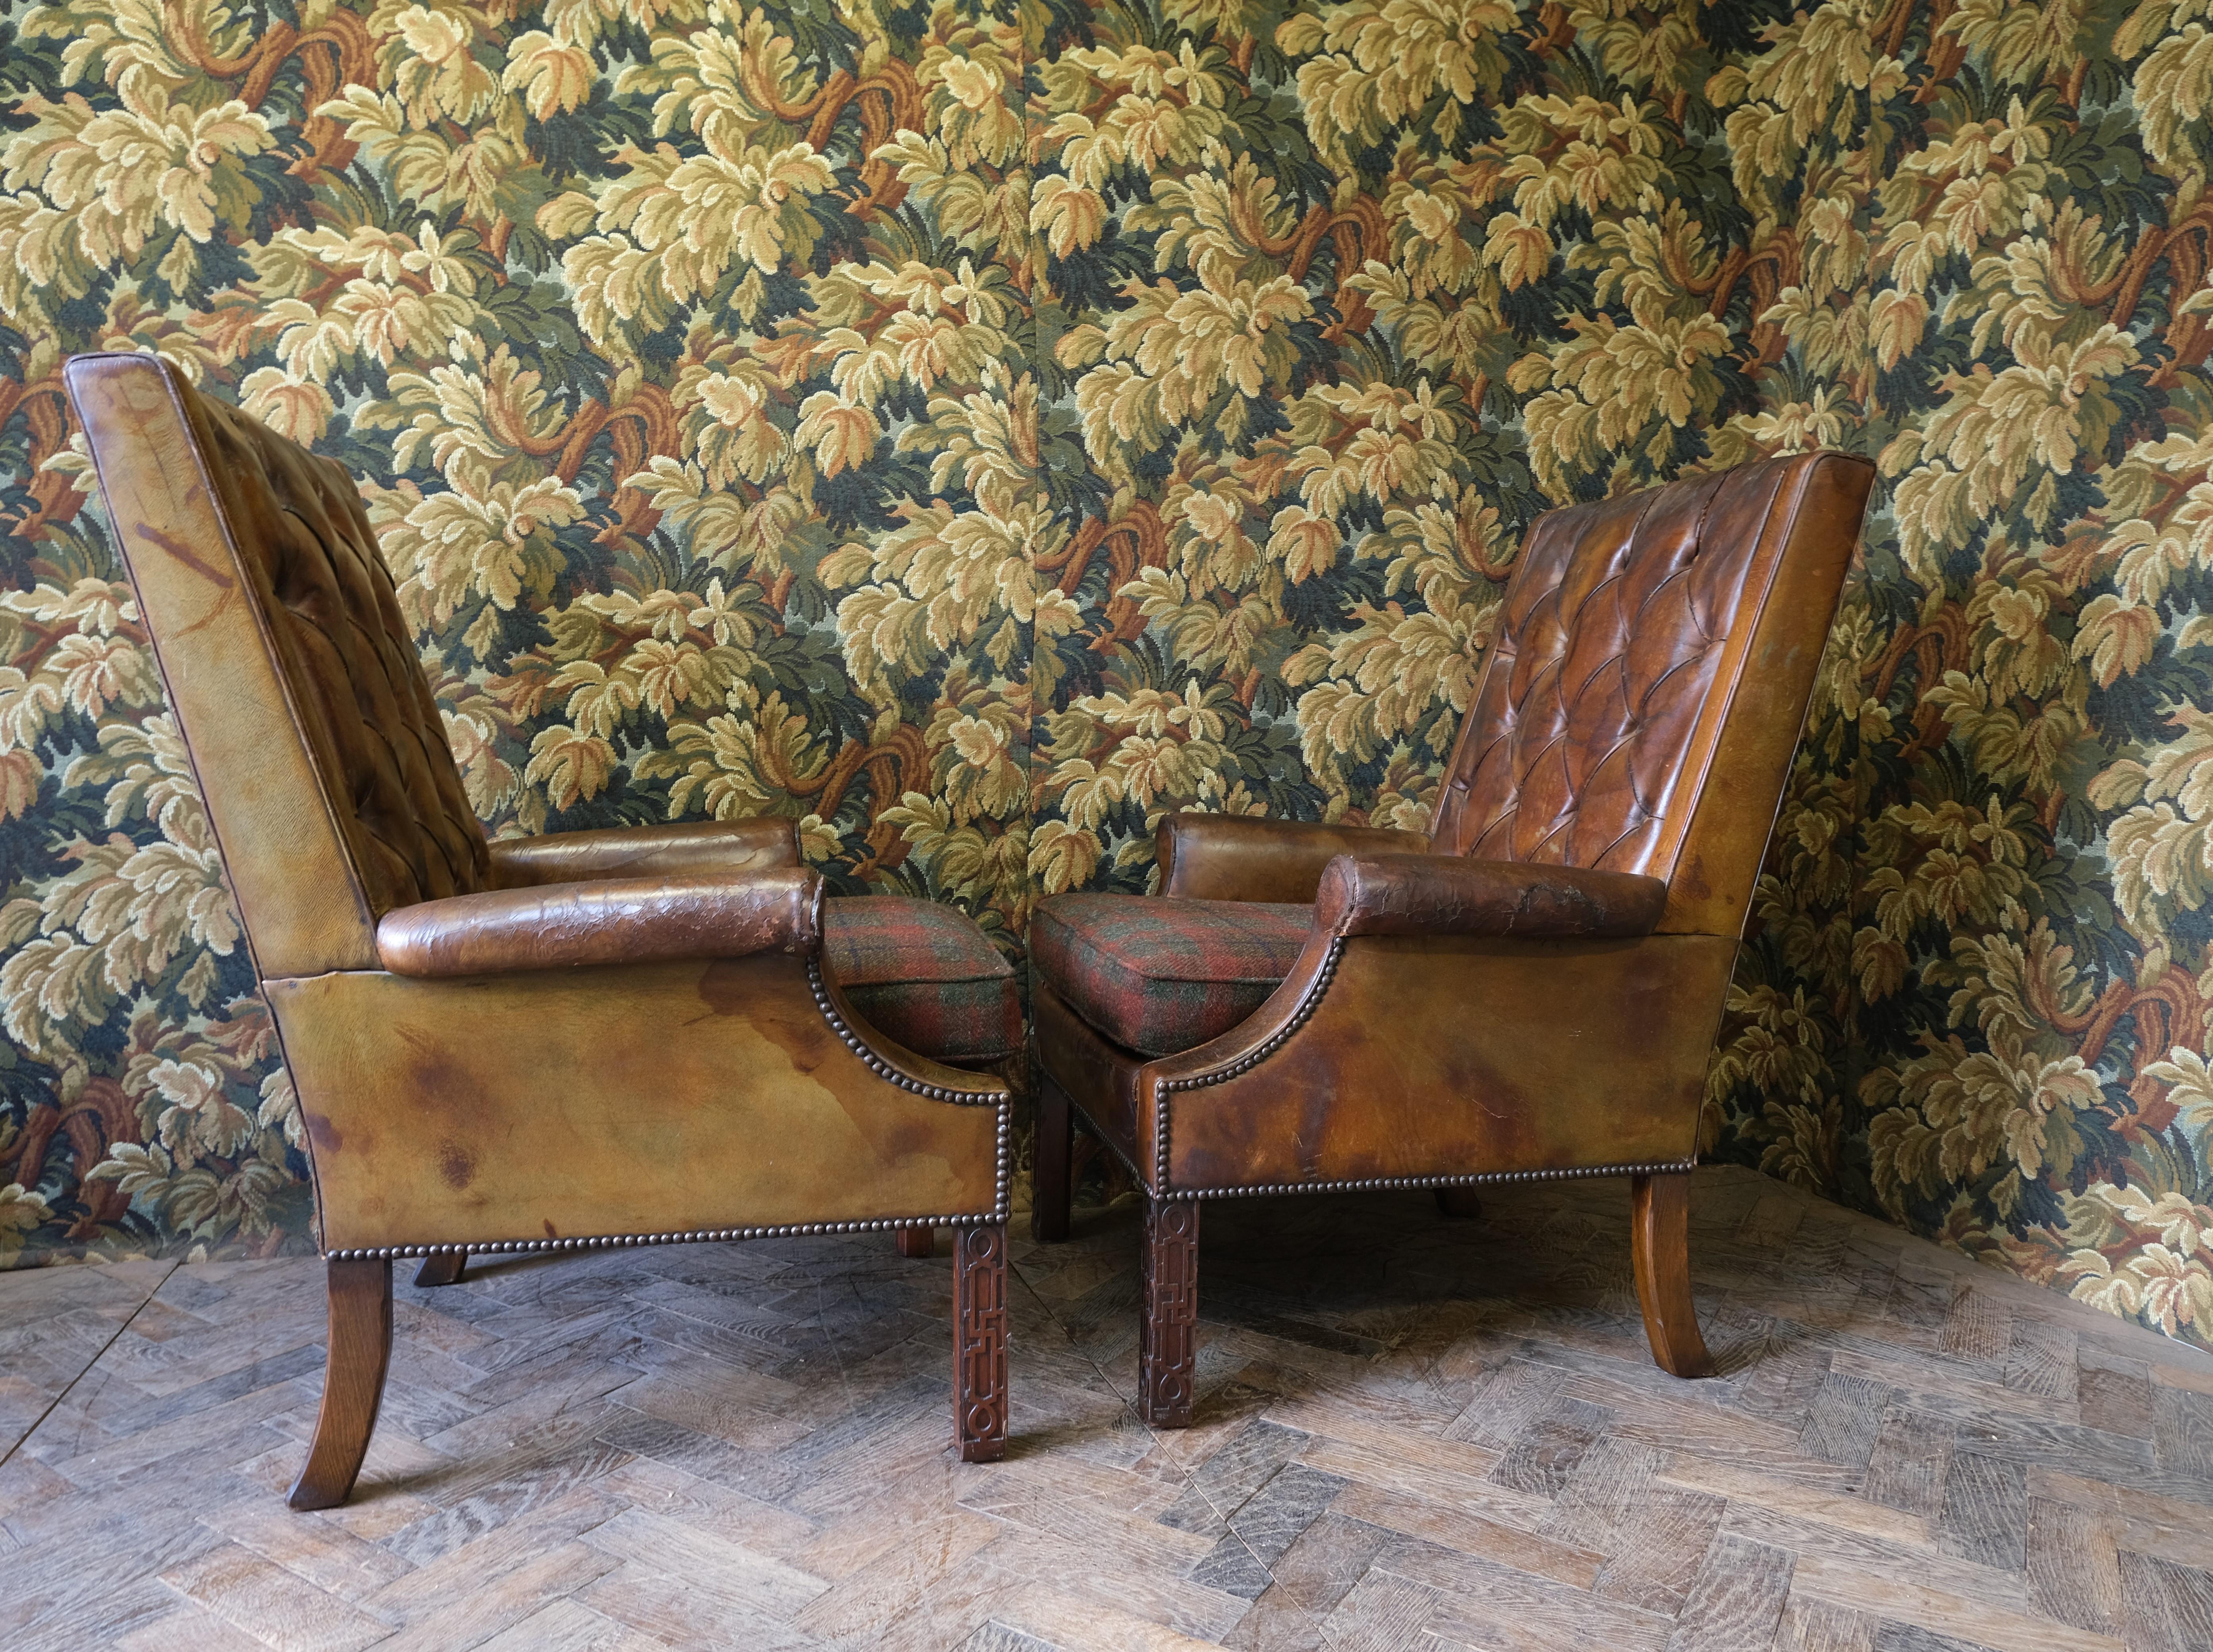 Hutton-Clarke Antiques is delighted to showcase an exquisite pair of early 20th-century English armchairs, a testament to timeless elegance and craftsmanship. These armchairs are masterfully upholstered in original, shabby chic leather,